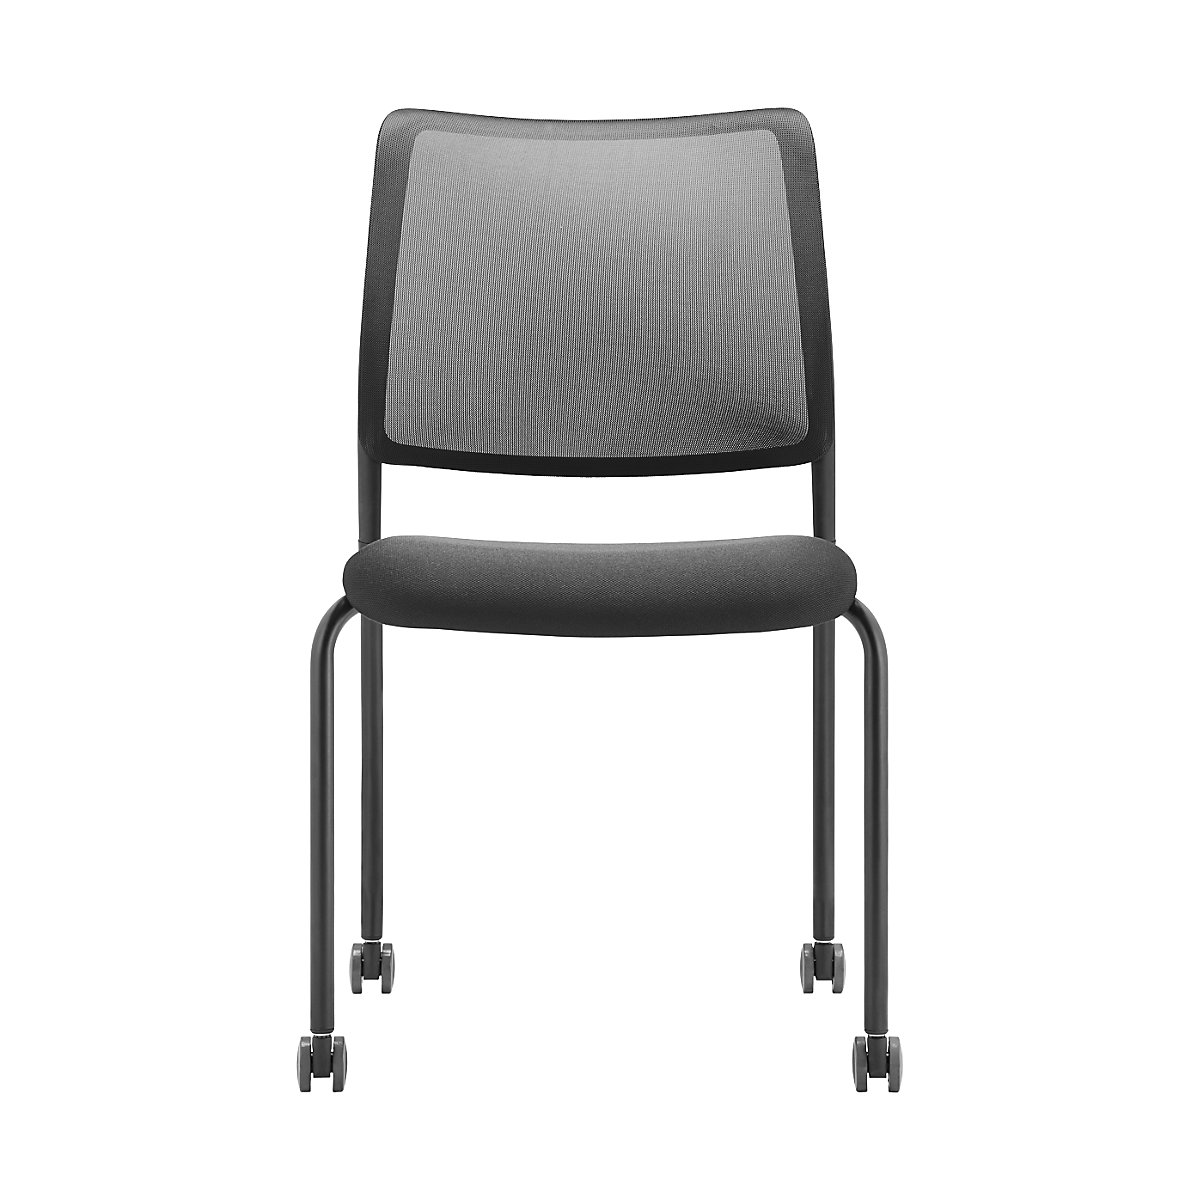 TO-SYNC meet meeting room chair – TrendOffice, with mesh back rest, pack of 4, black, with castors-3